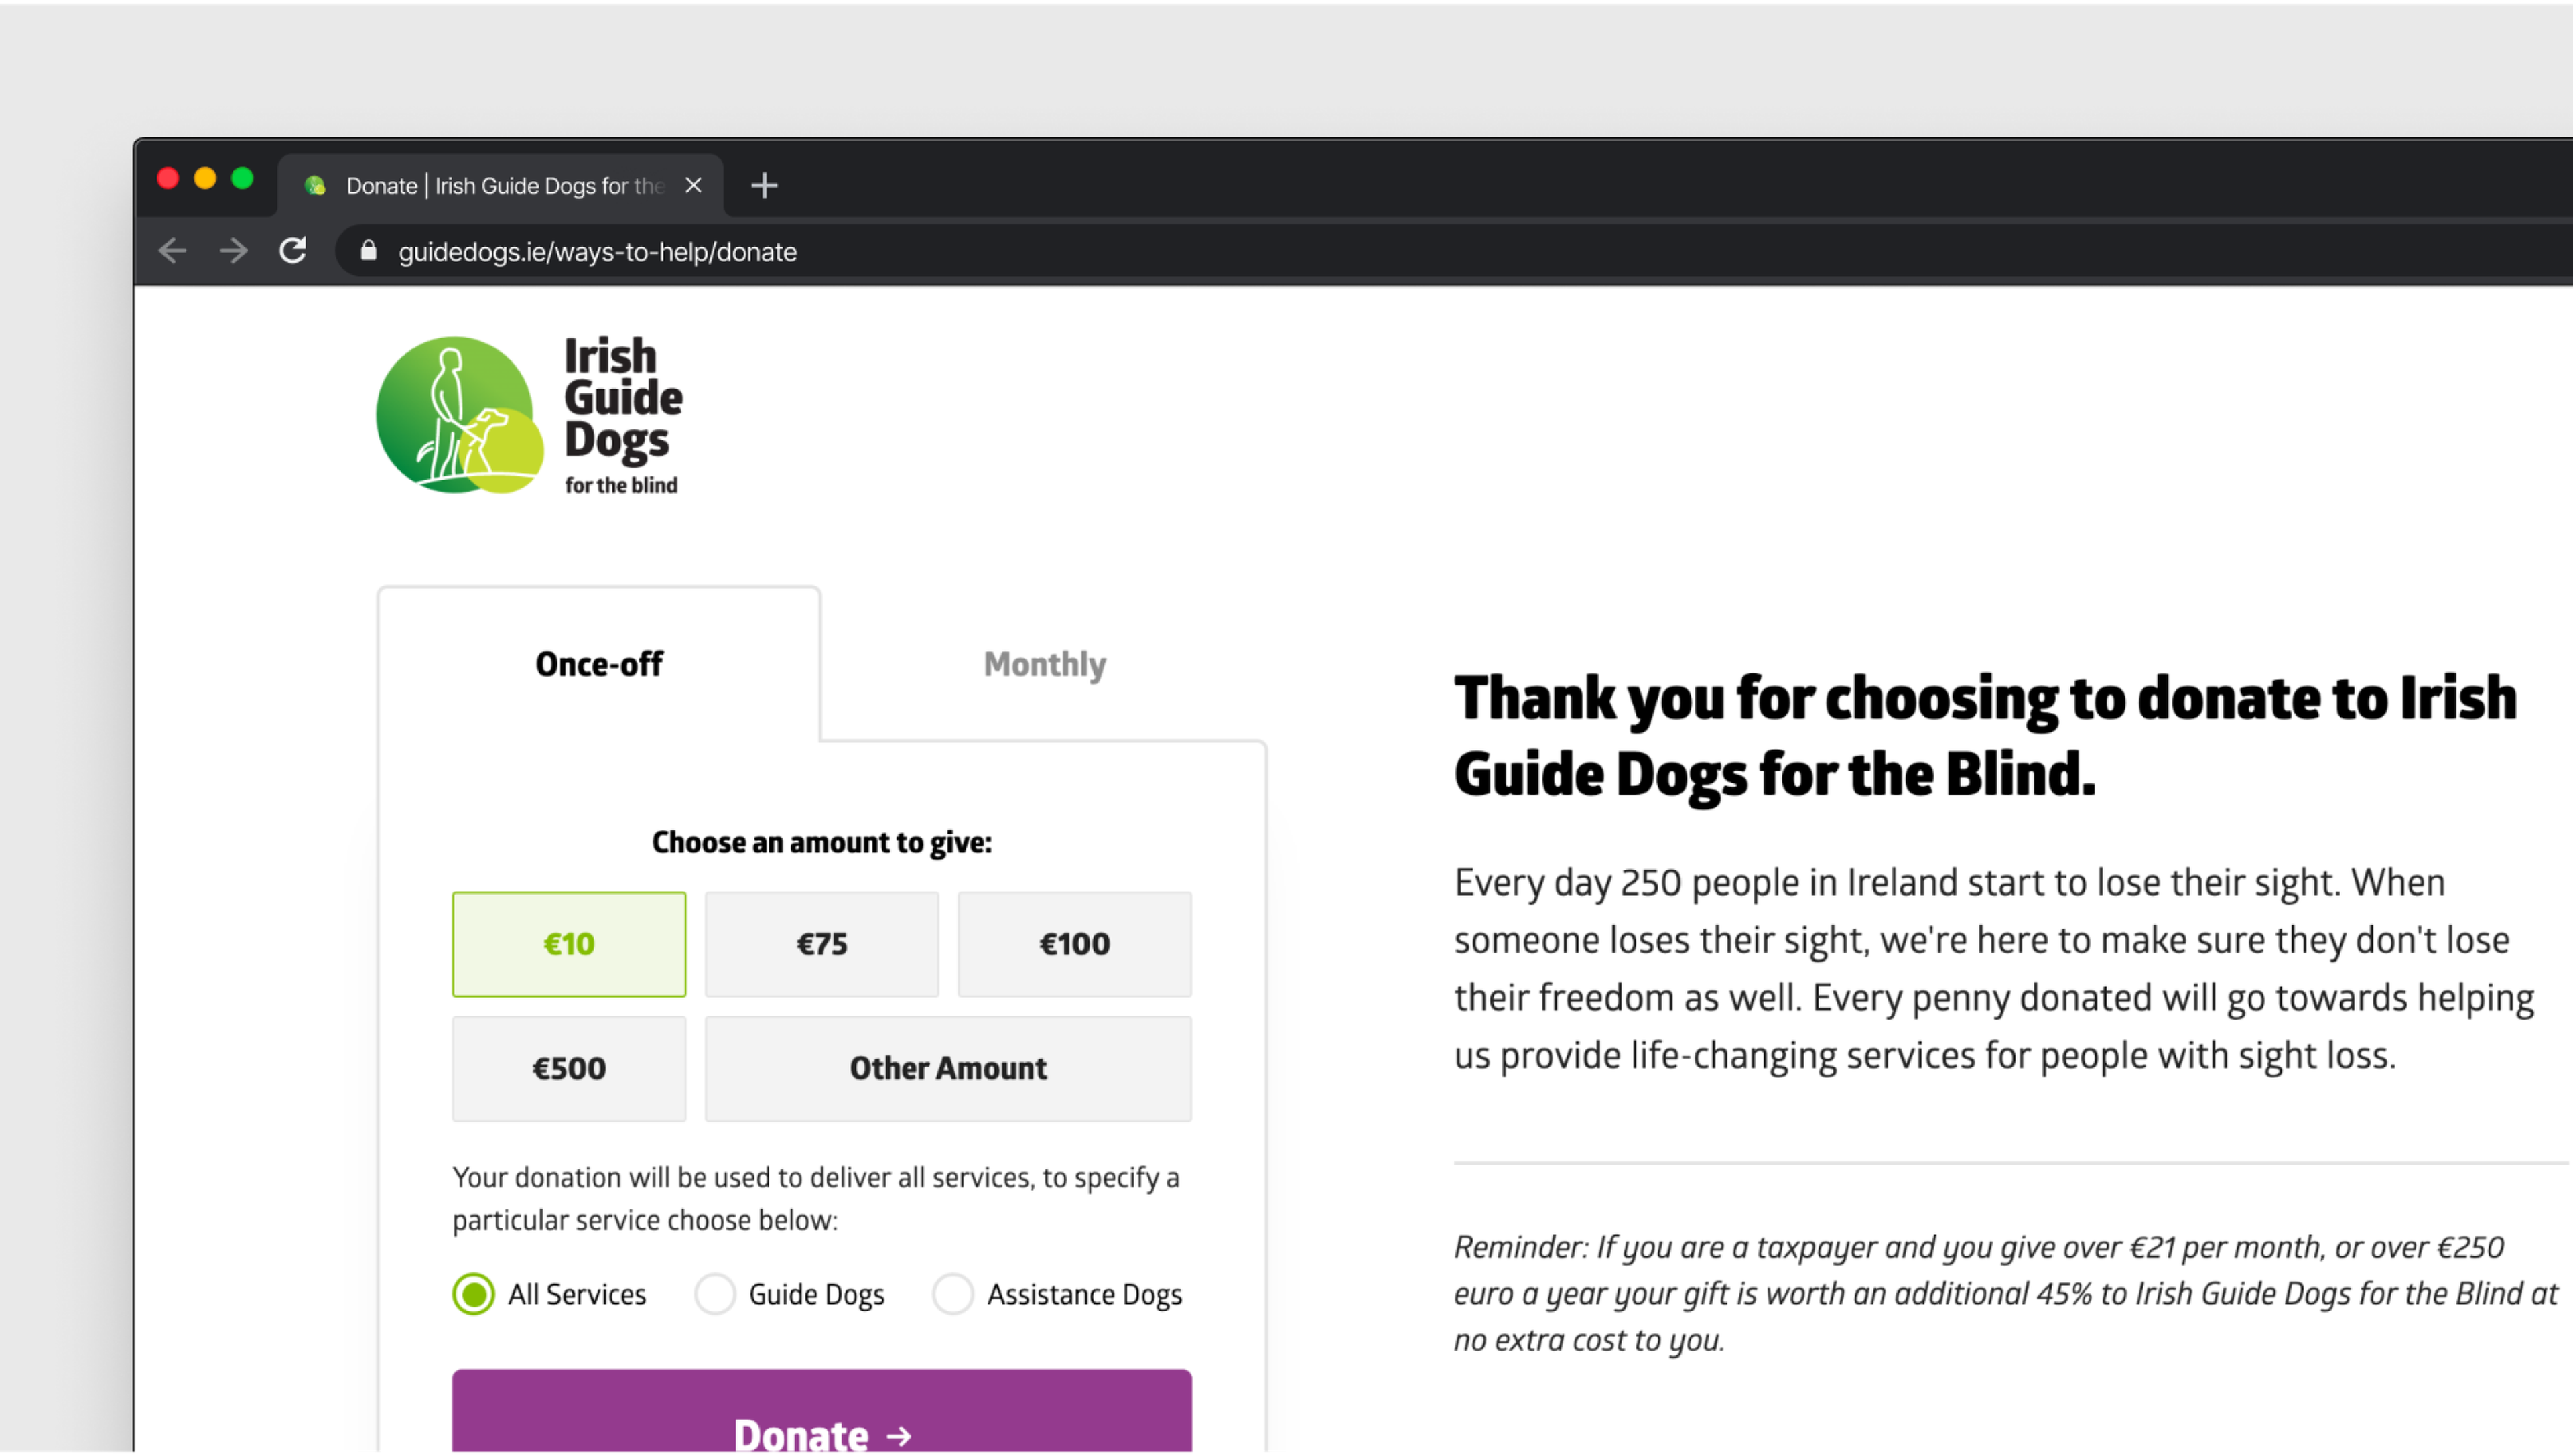 Building a custom website that increased donations to Irish Guide Dogs